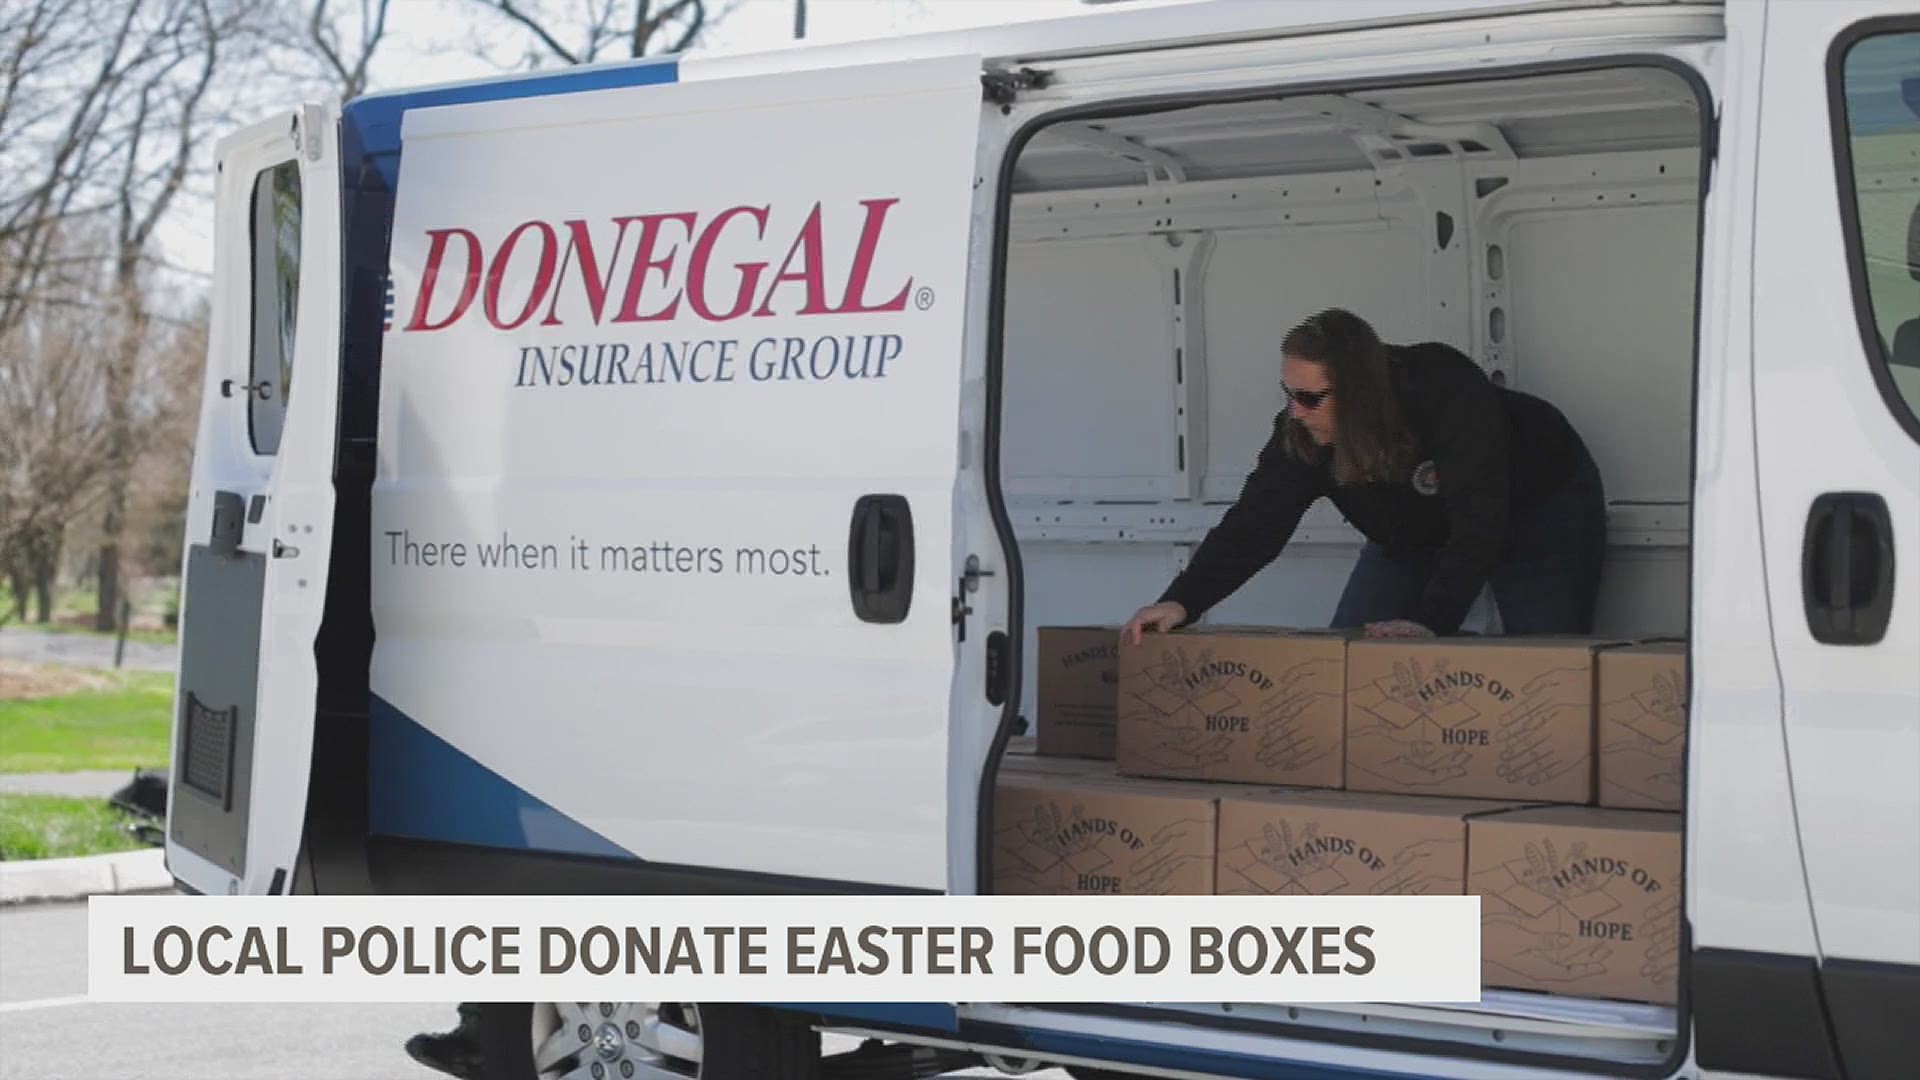 Local Police Donate Easter Food Boxes to Families in the area.